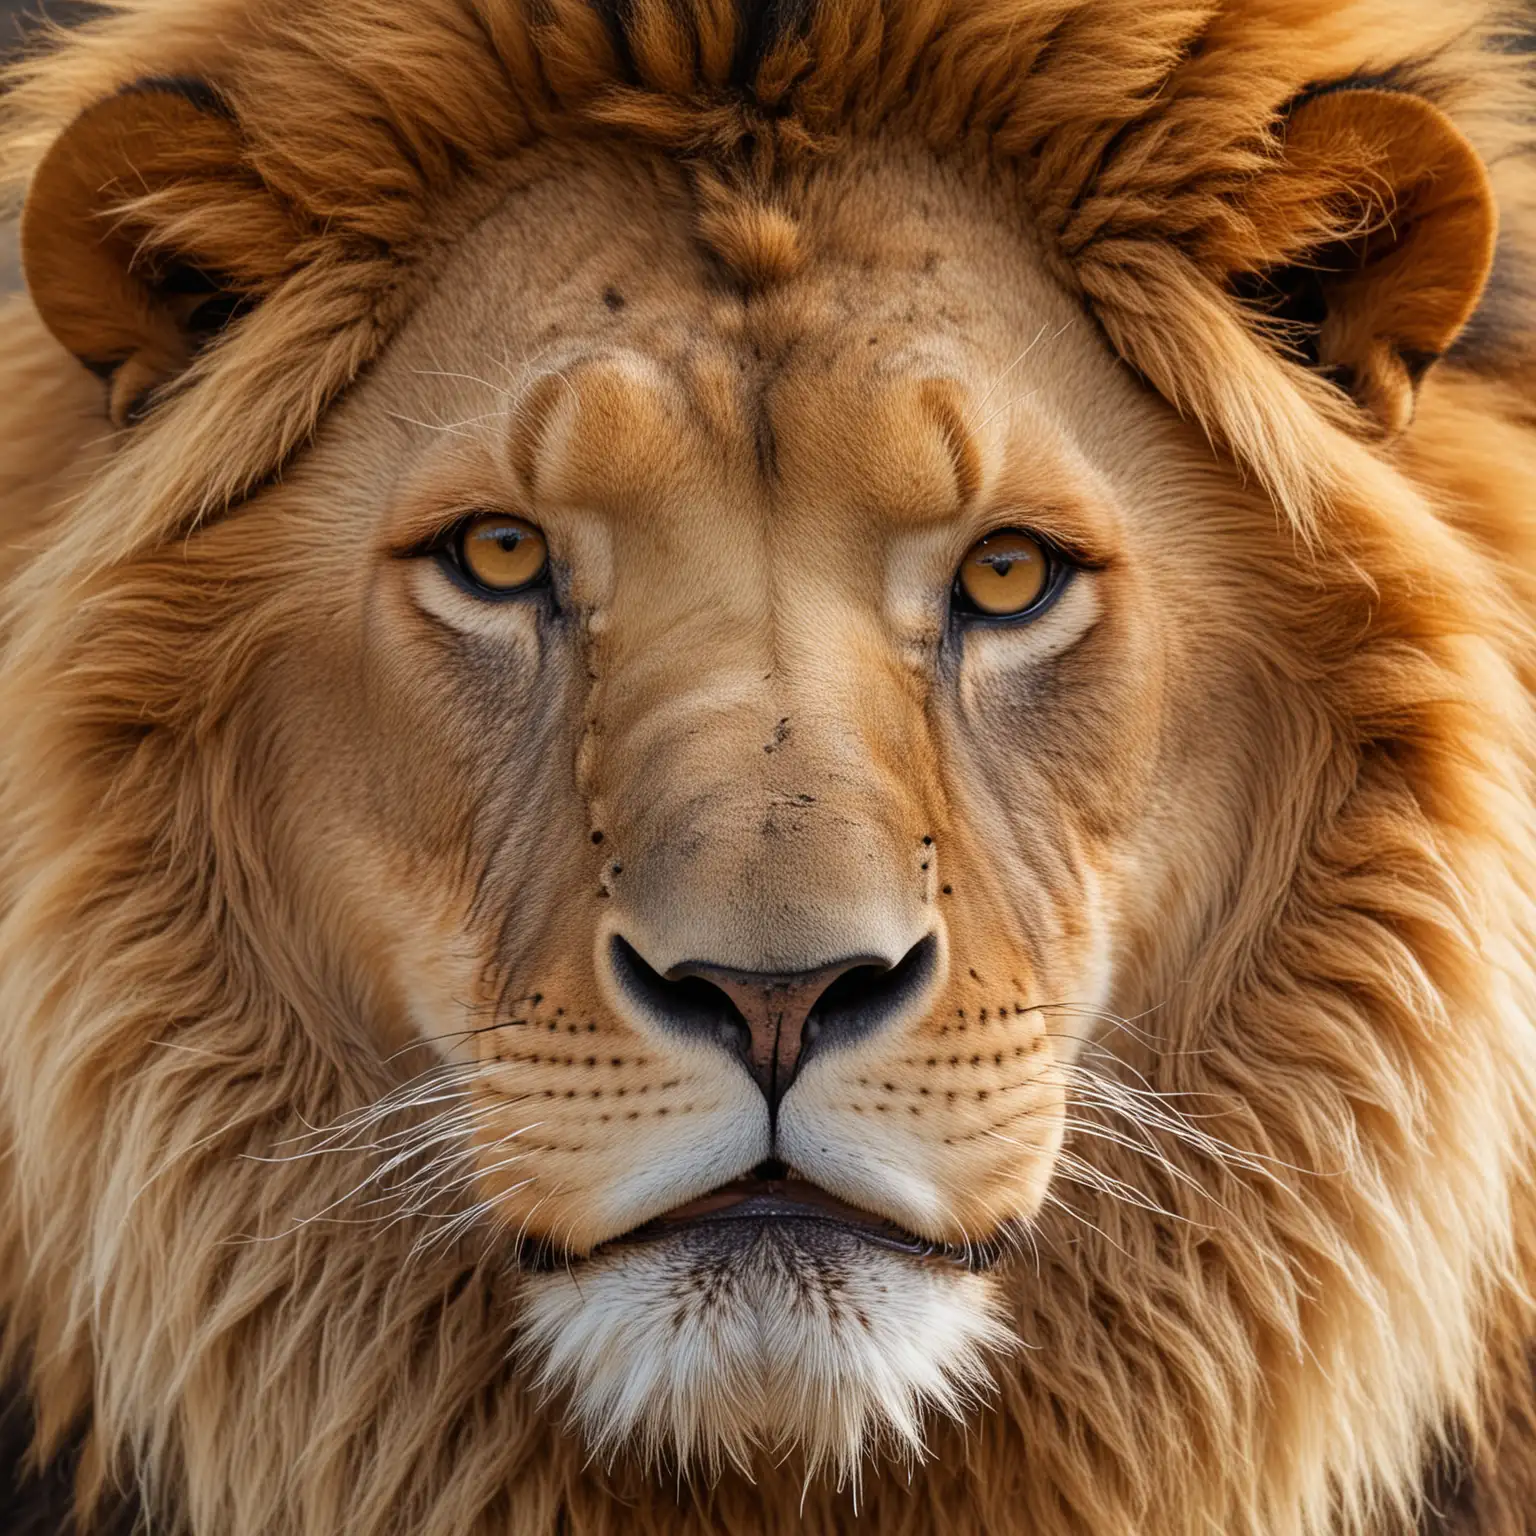 Majestic Lion with Full Face Portrait in Vibrant Natural Setting